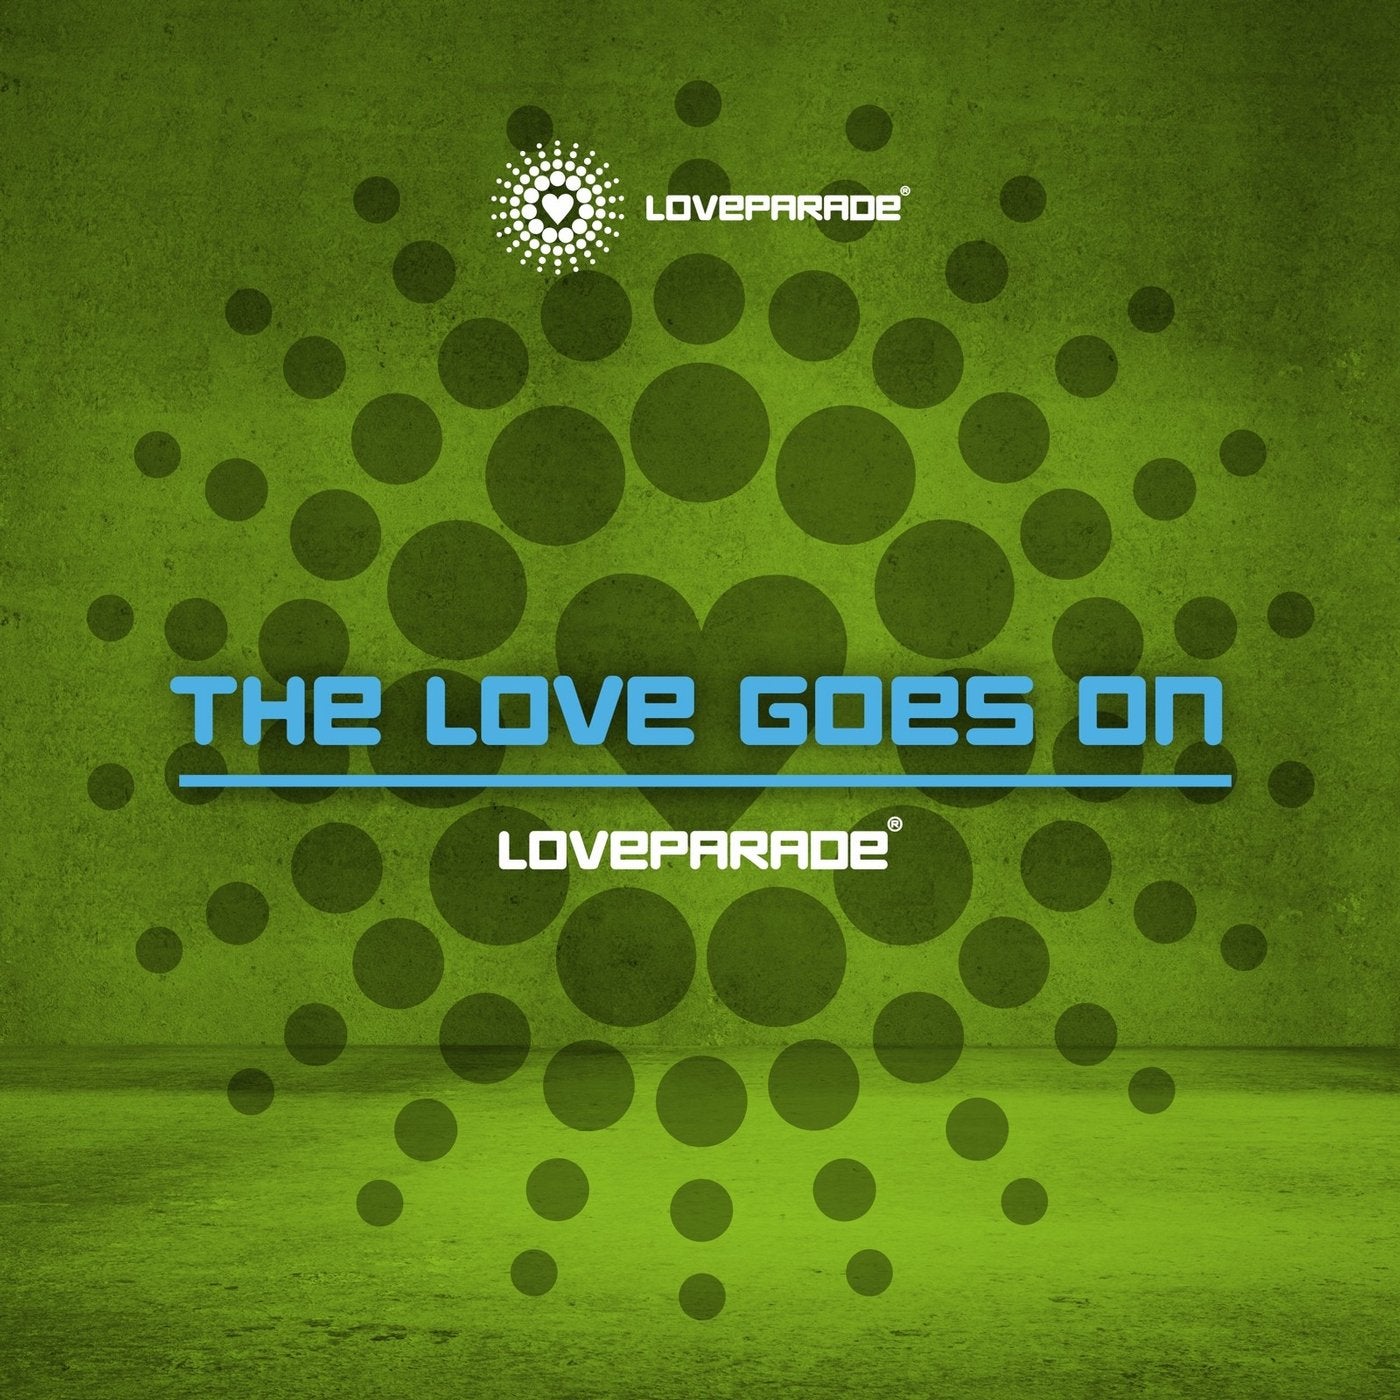 Loveparade - The Love Goes On